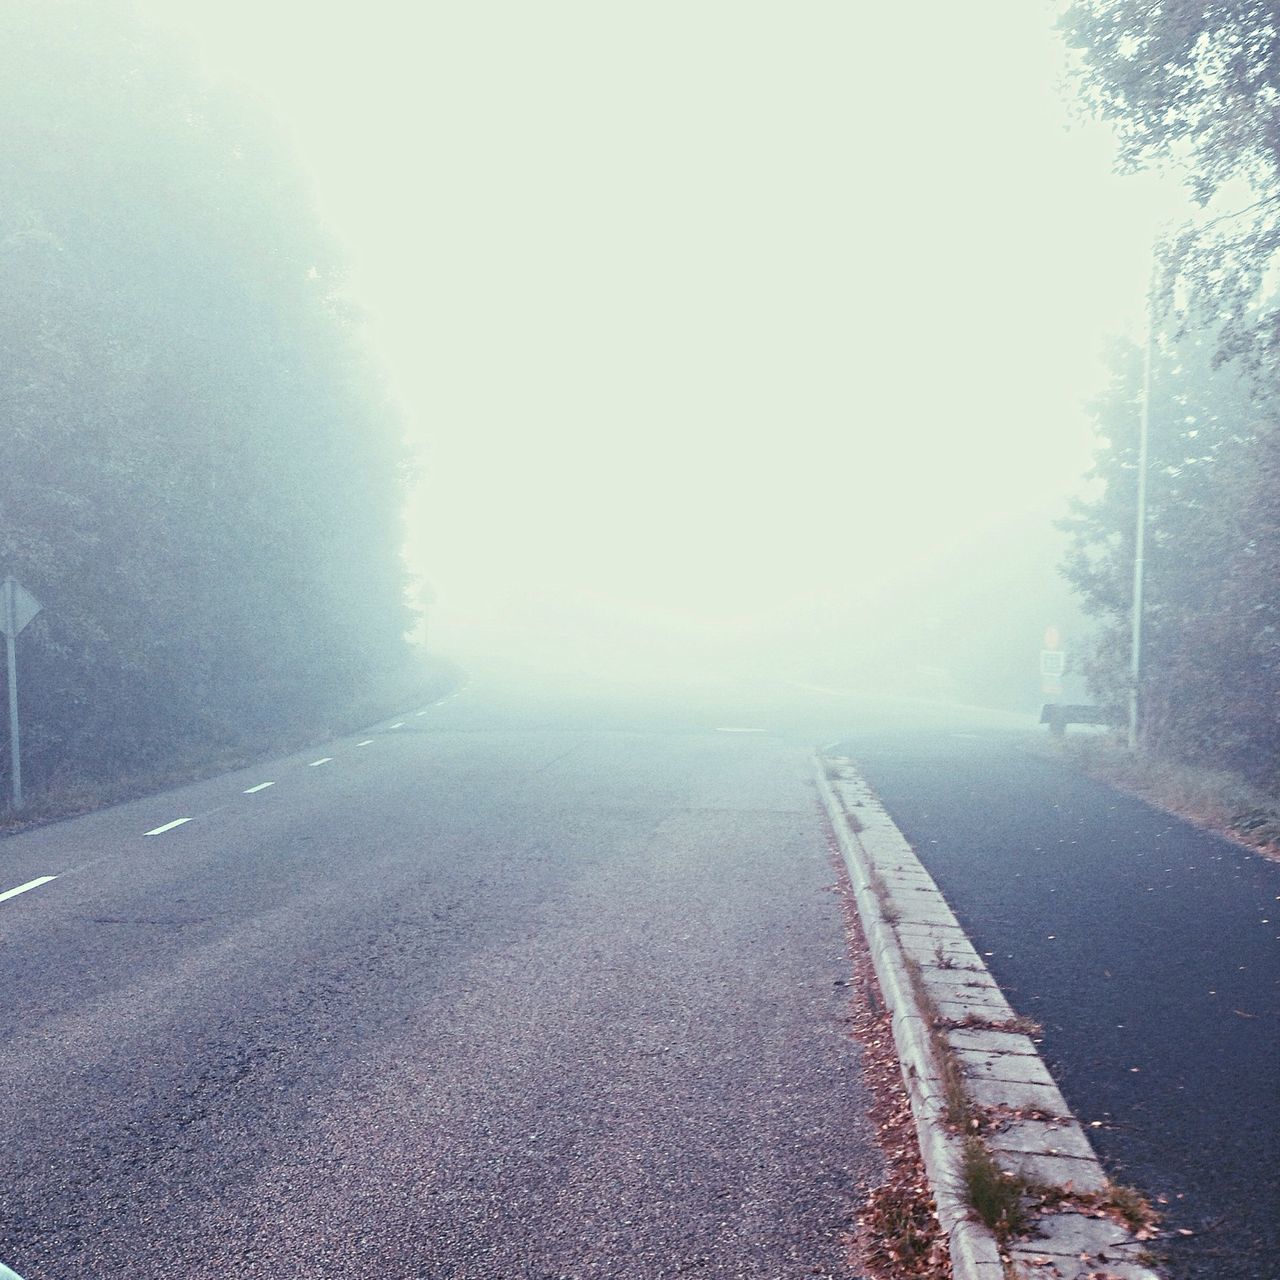 fog, the way forward, foggy, road, transportation, weather, tree, tranquility, tranquil scene, diminishing perspective, nature, vanishing point, beauty in nature, sky, street, empty road, scenics, road marking, outdoors